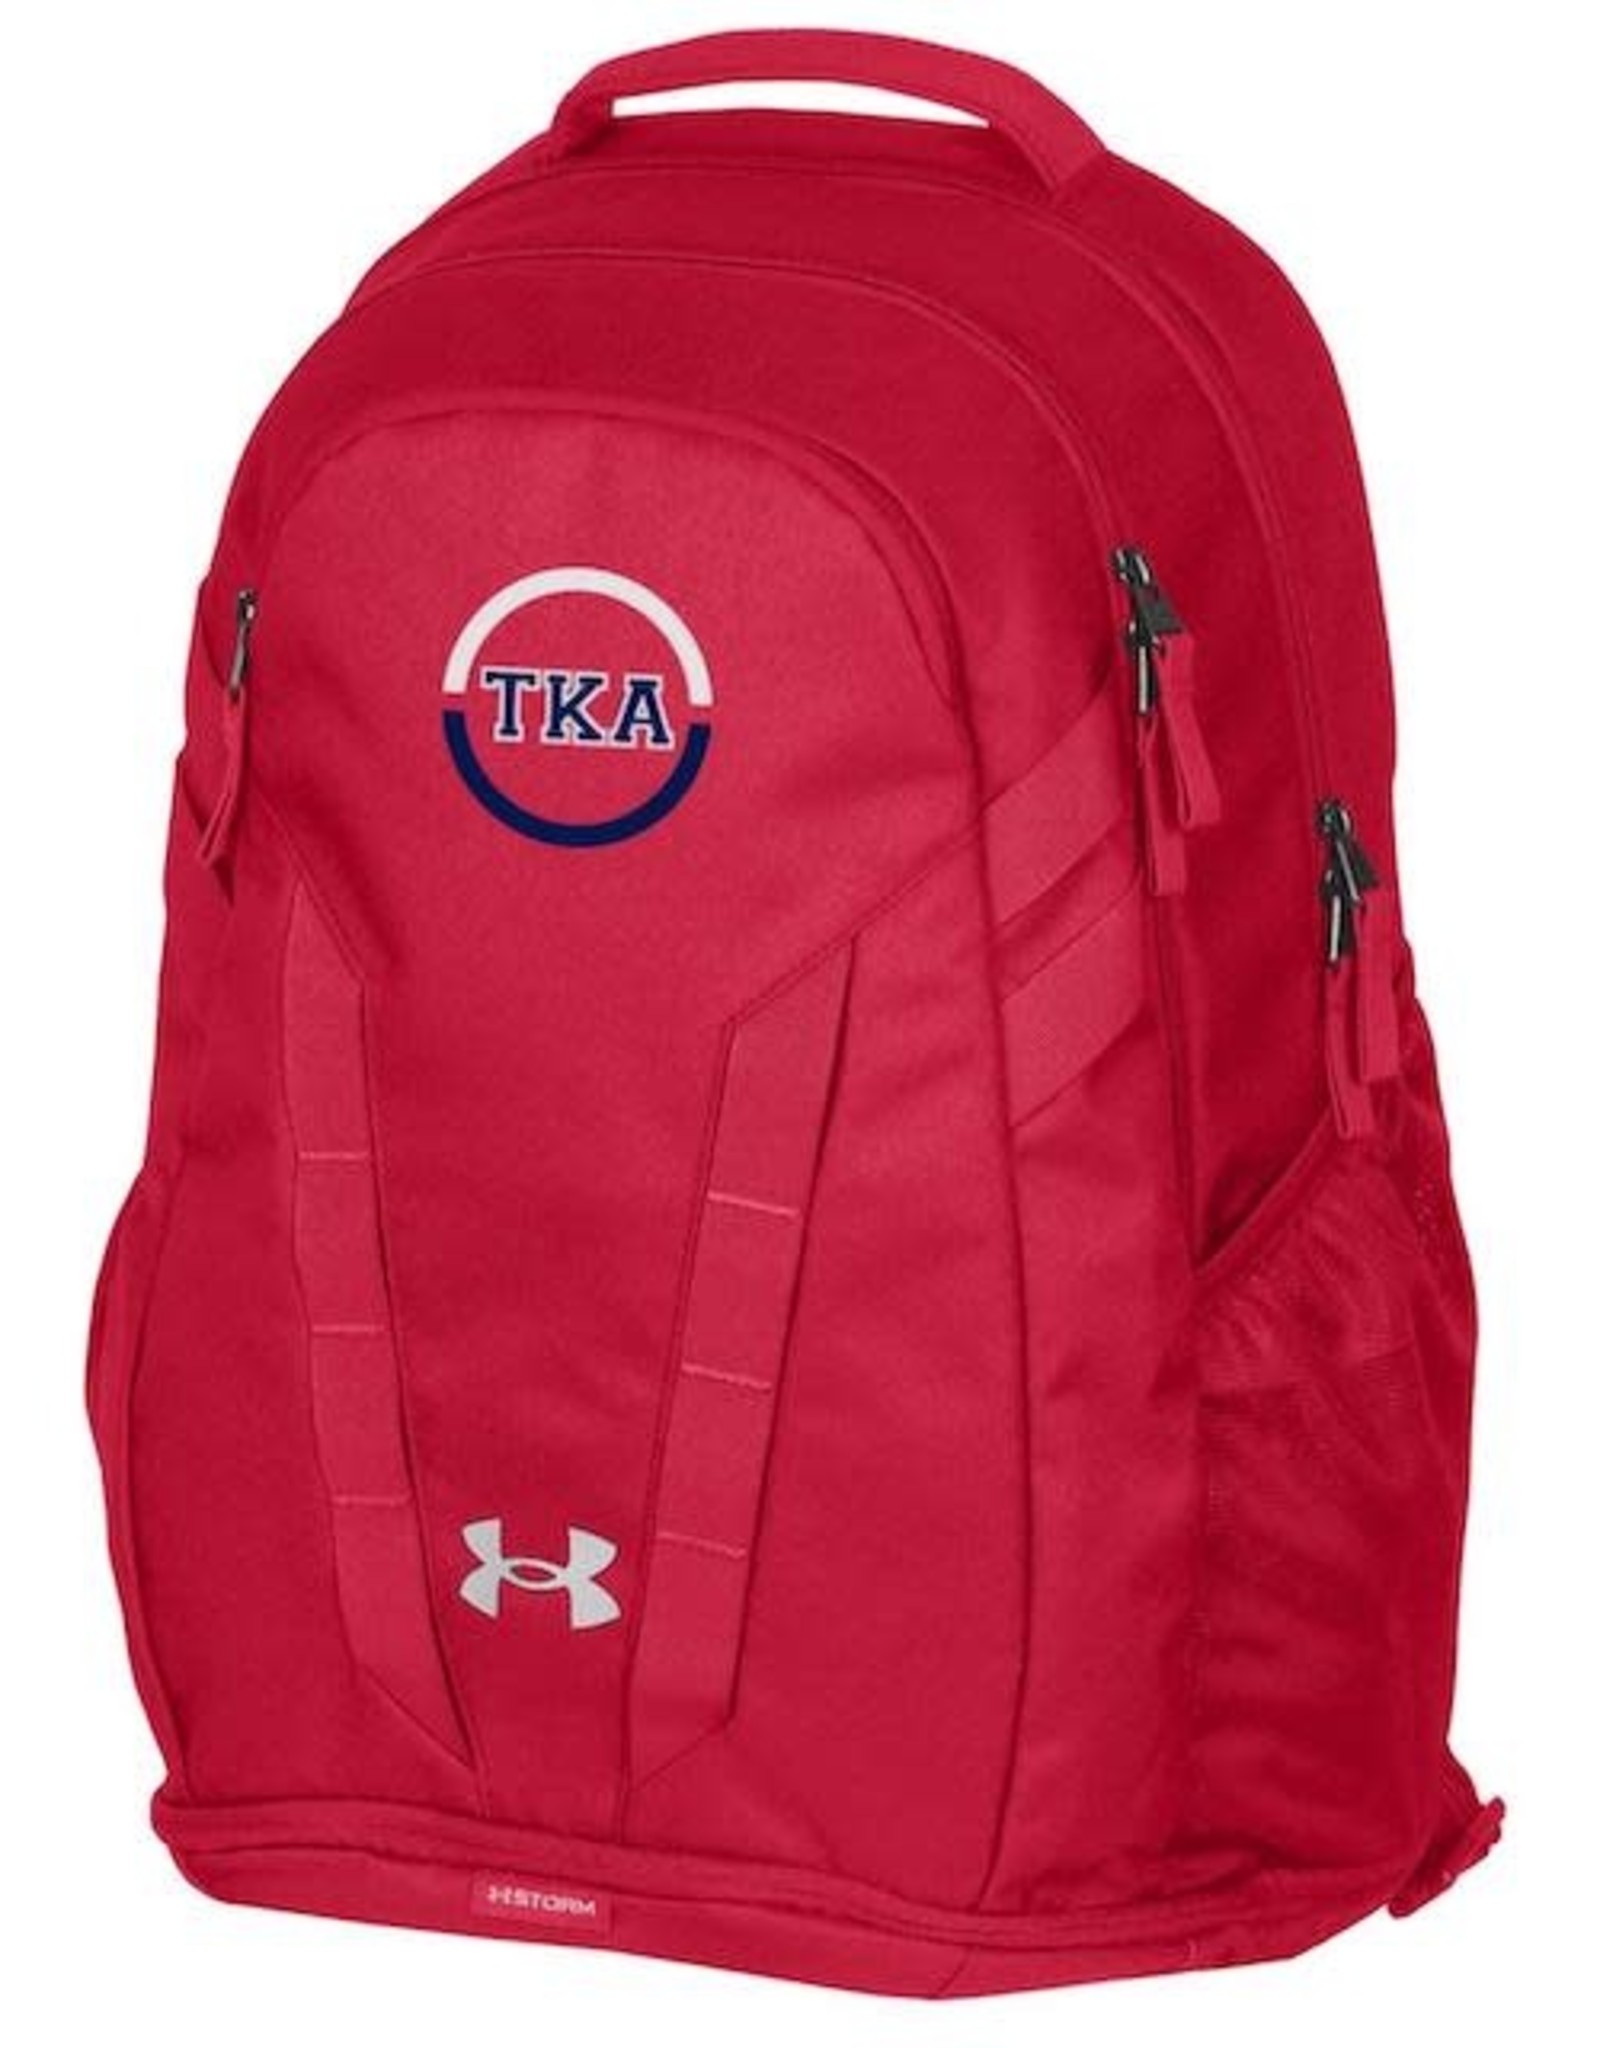 Under Armour Under Armour - Hustle 5.0 Backpack